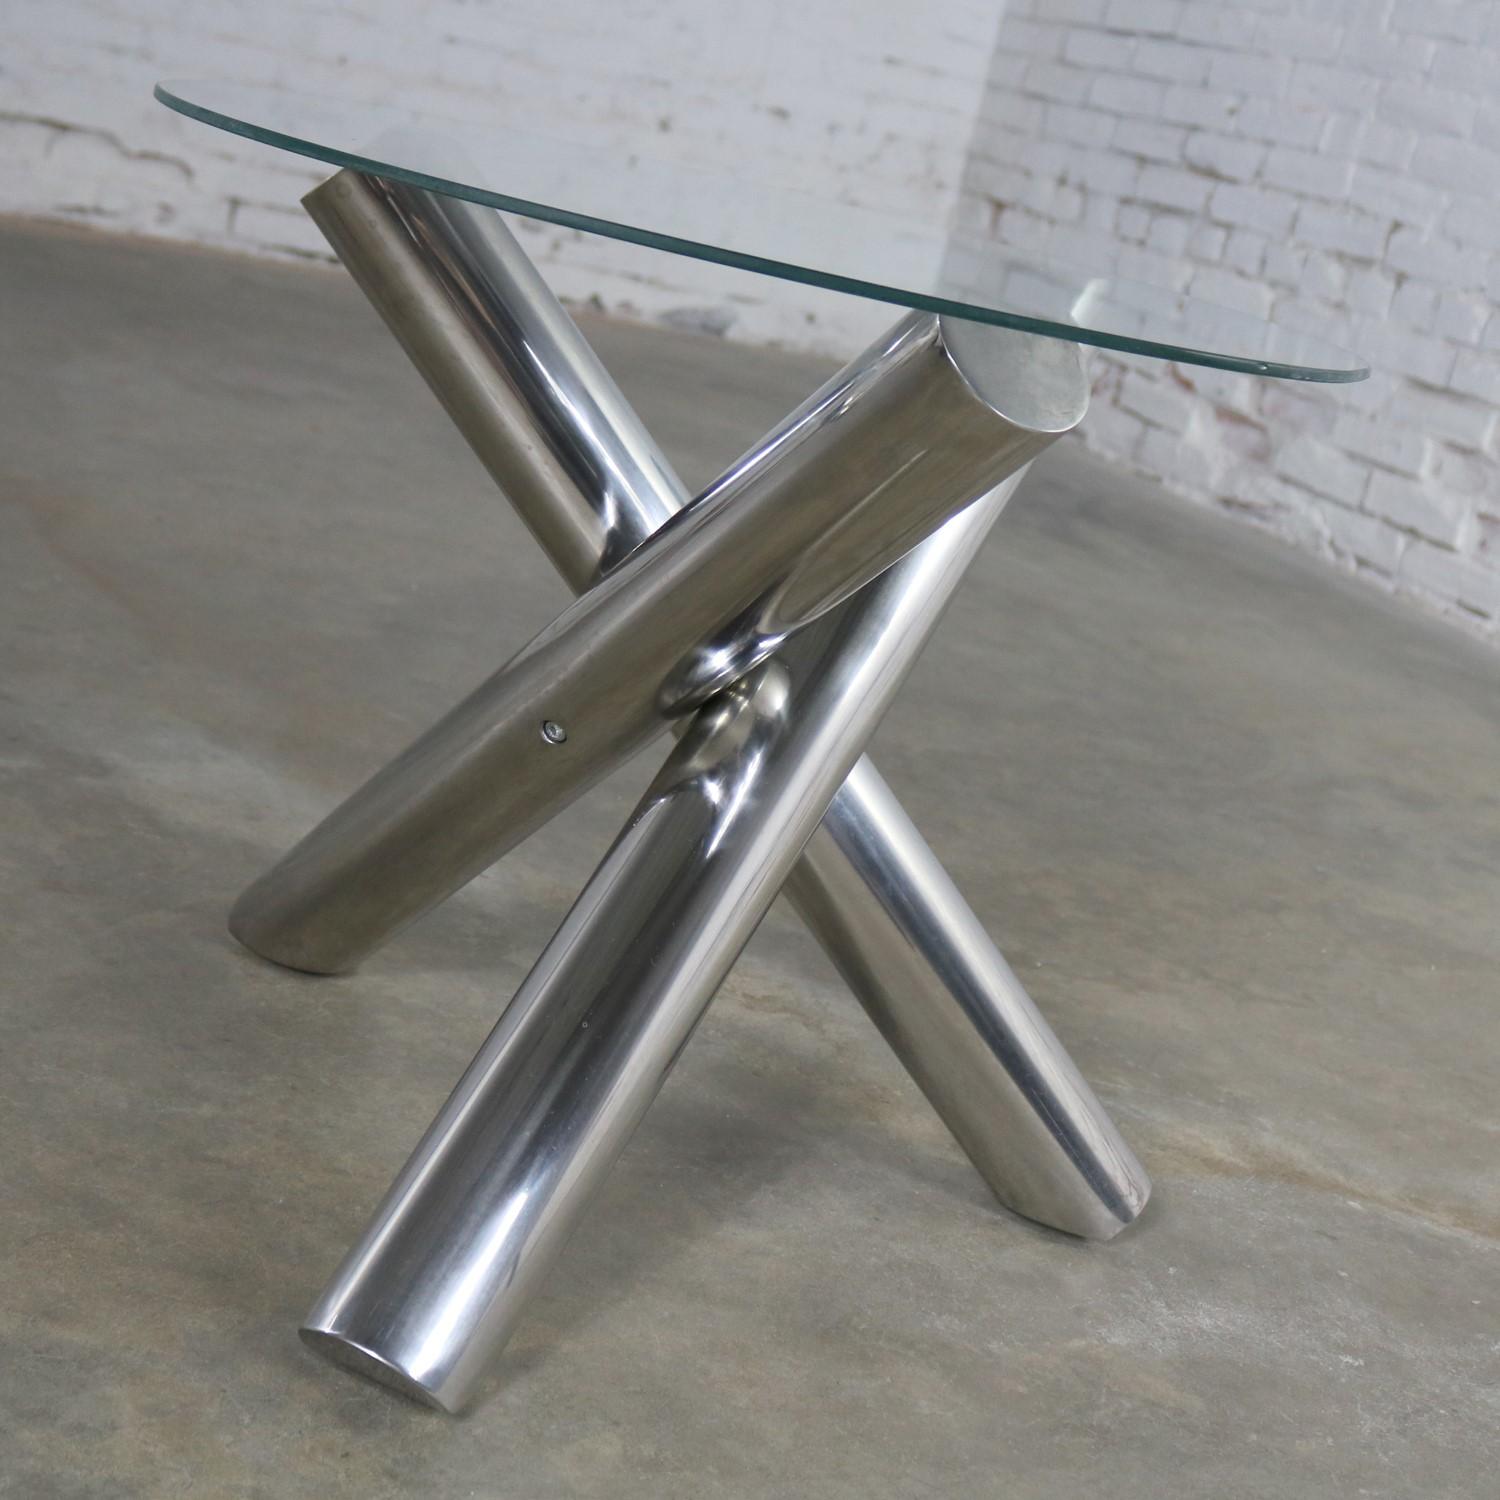 Incredible stainless-steel jacks shaped or tripod end table or side table with a round glass top. It is in wonderful vintage condition with no outstanding flaws we have detected. Please see photos. We will include glass top unless asked otherwise,